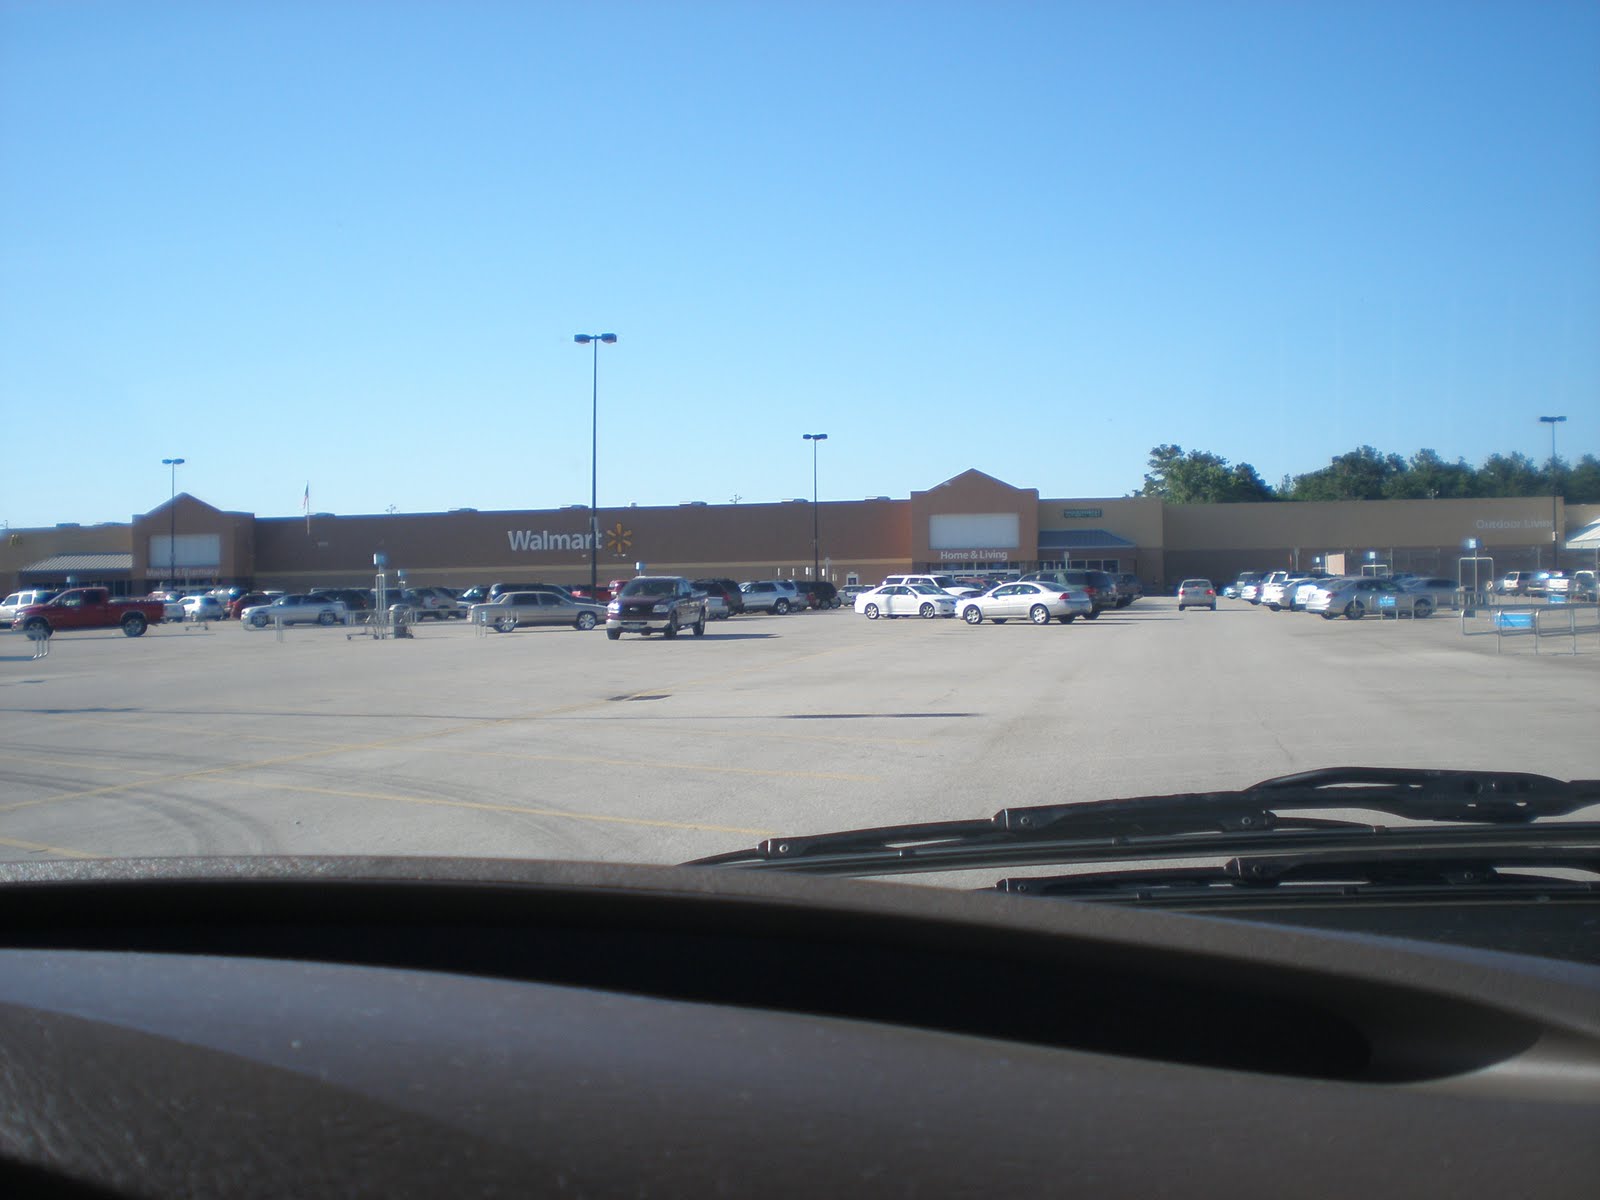 ... Texas Southern Malls and Retail: The retail district of Humble Texas